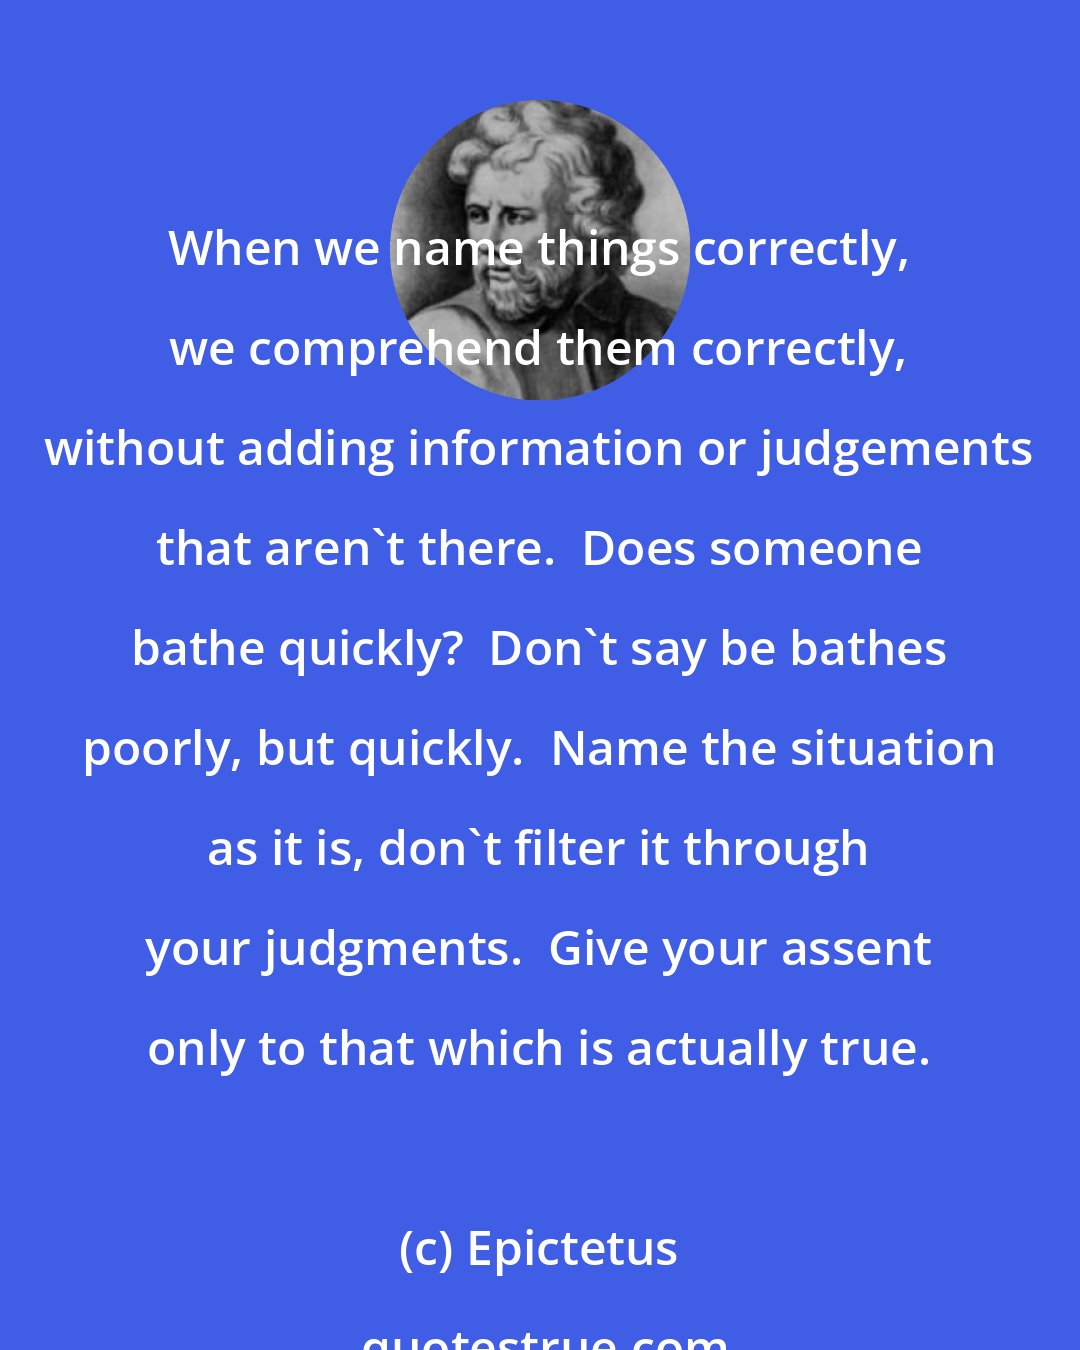 Epictetus: When we name things correctly, we comprehend them correctly, without adding information or judgements that aren't there.  Does someone bathe quickly?  Don't say be bathes poorly, but quickly.  Name the situation as it is, don't filter it through your judgments.  Give your assent only to that which is actually true.